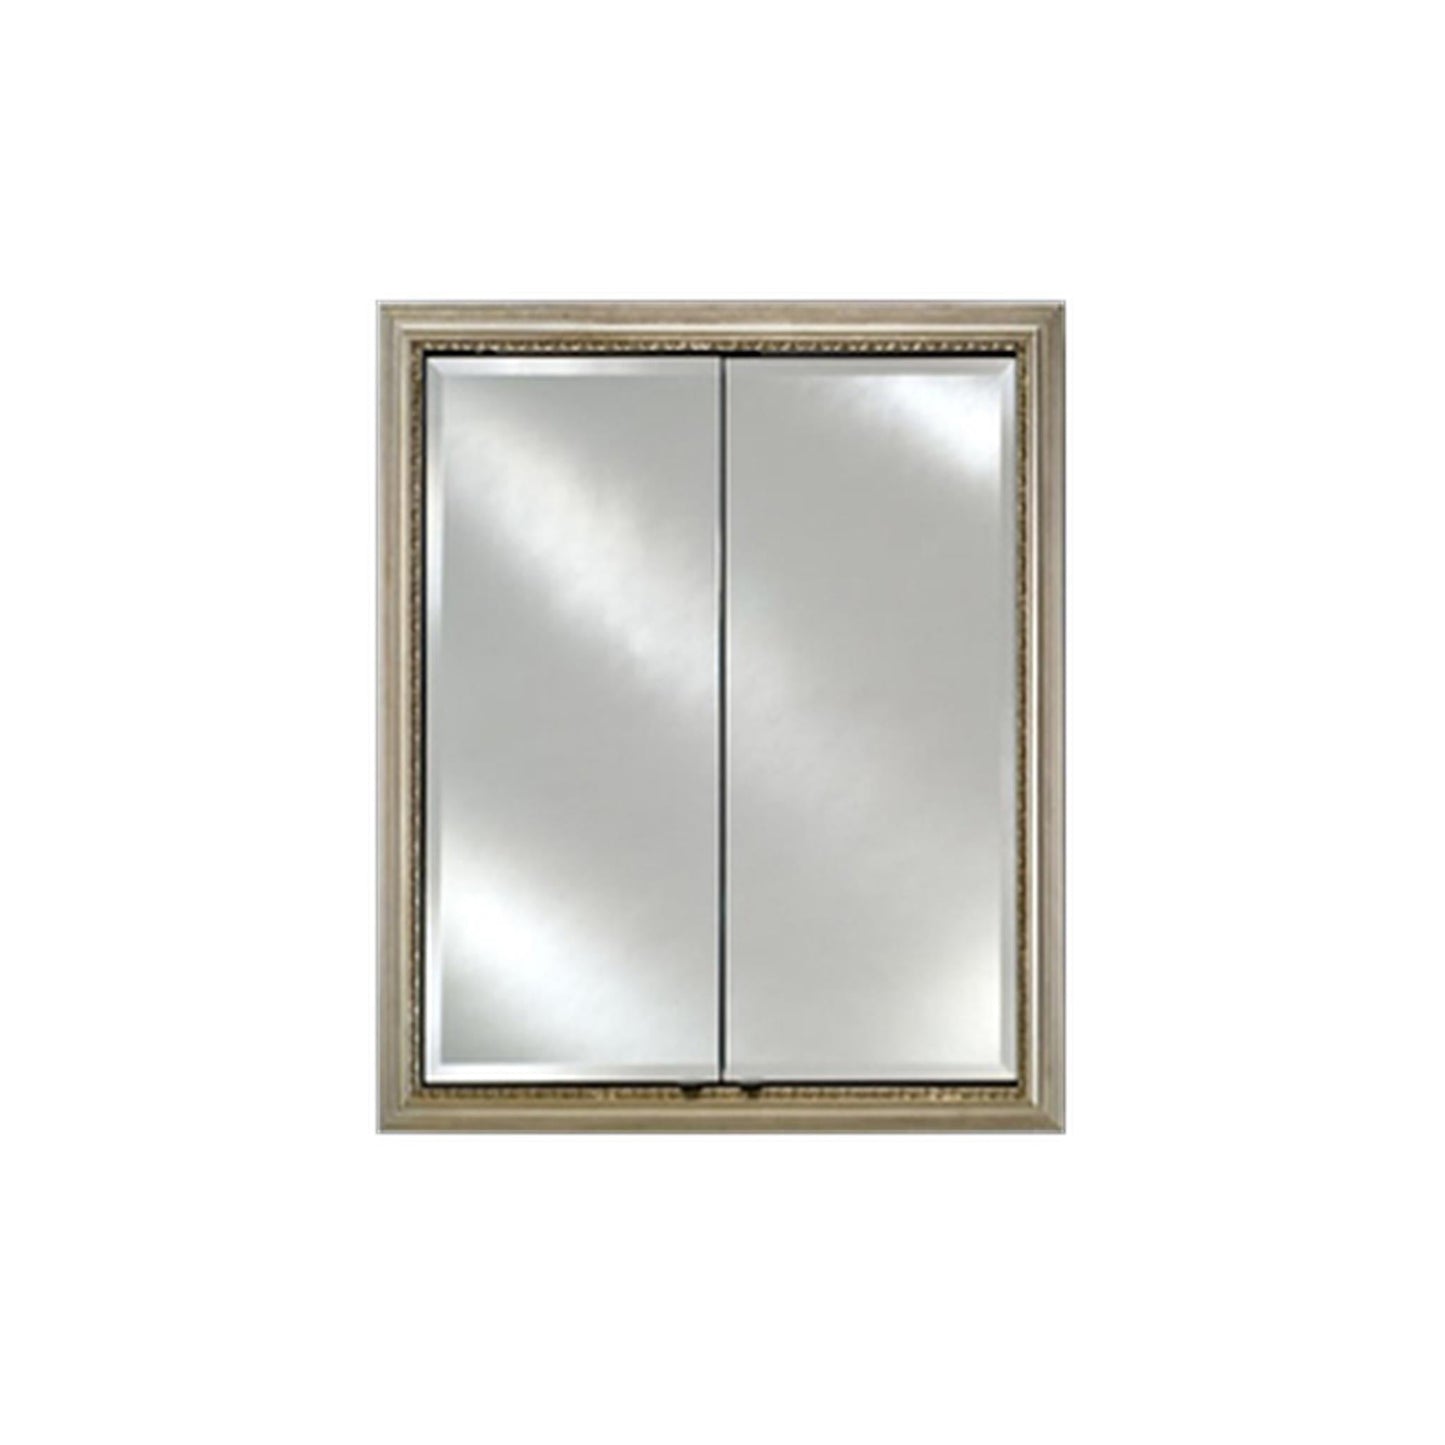 Afina Signature 27" x 21" Polished Glimmer-Scallop Recessed Retro-Fit Double Door Medicine Cabinet With Beveled Edge Mirror